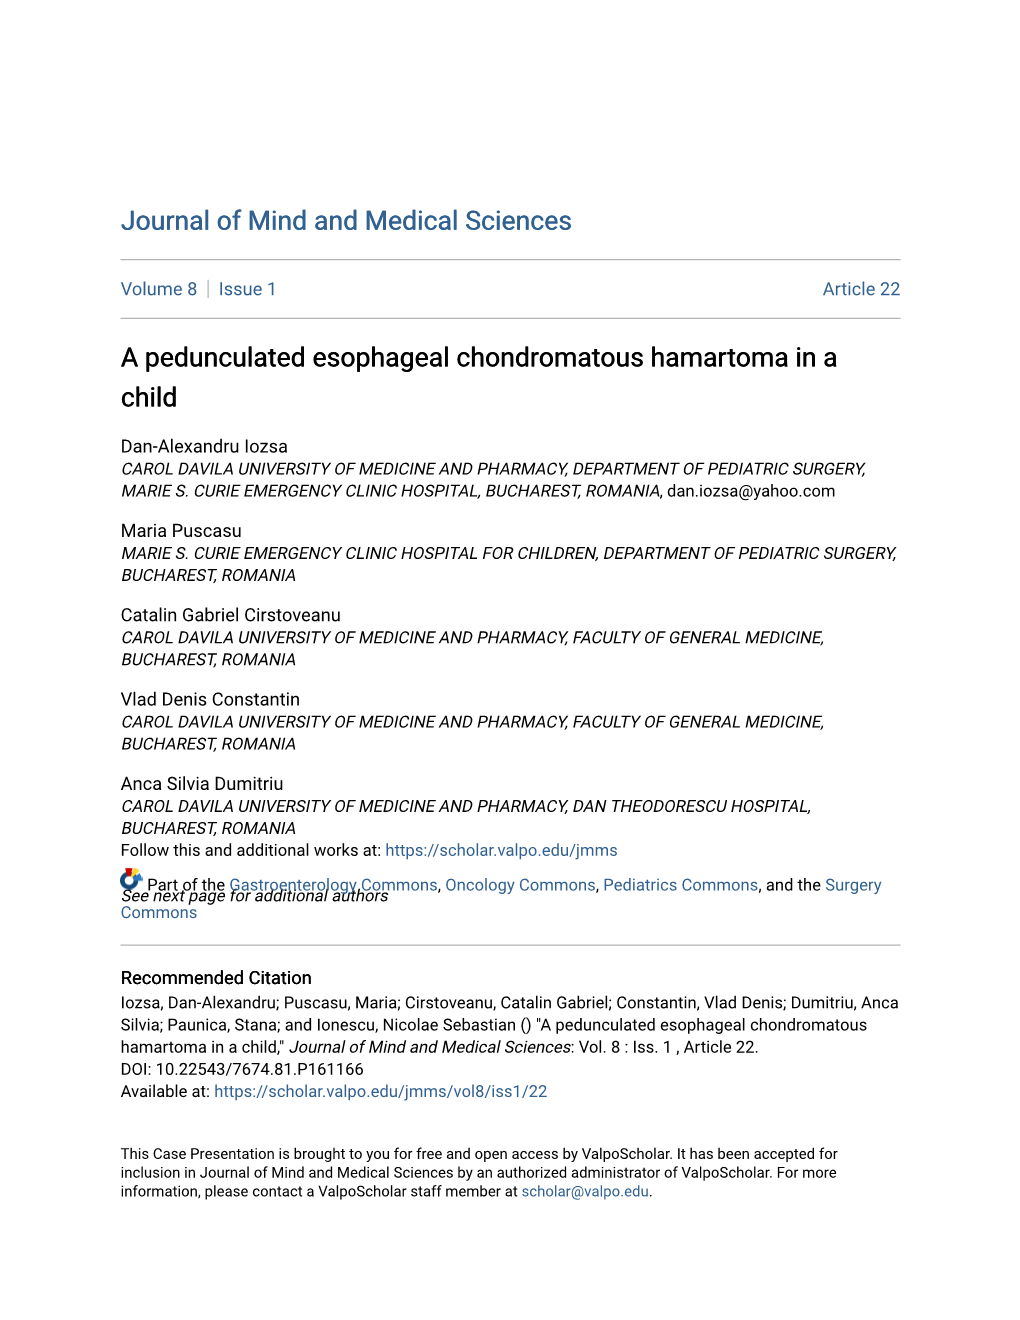 A Pedunculated Esophageal Chondromatous Hamartoma in a Child